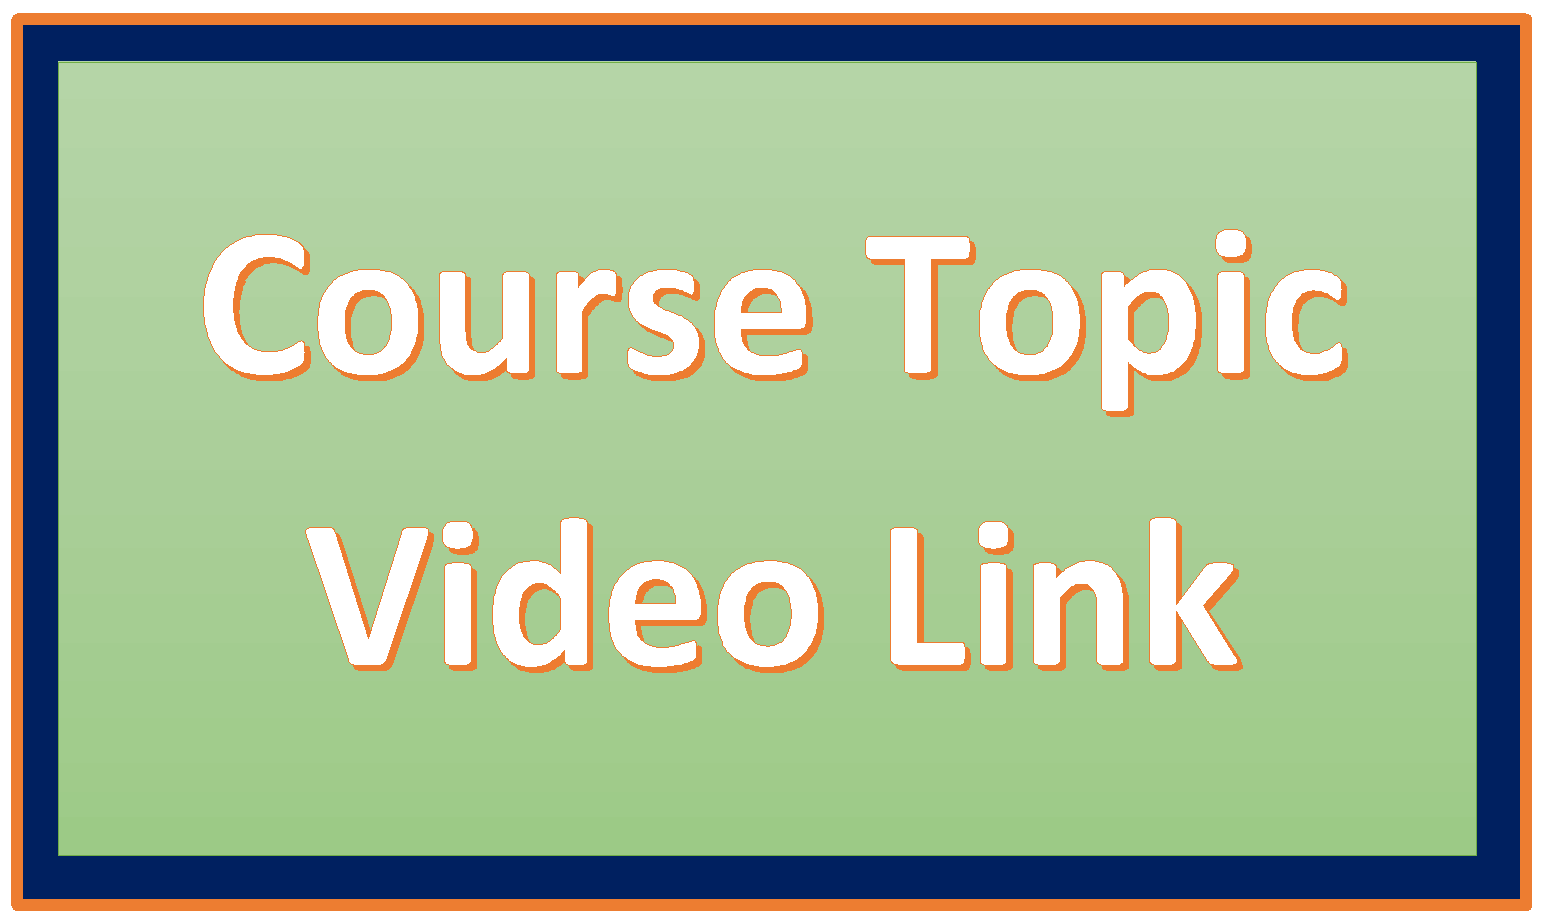 http://study.aisectonline.com/images/Retail Sales Associate Course Topic Videos Link.png